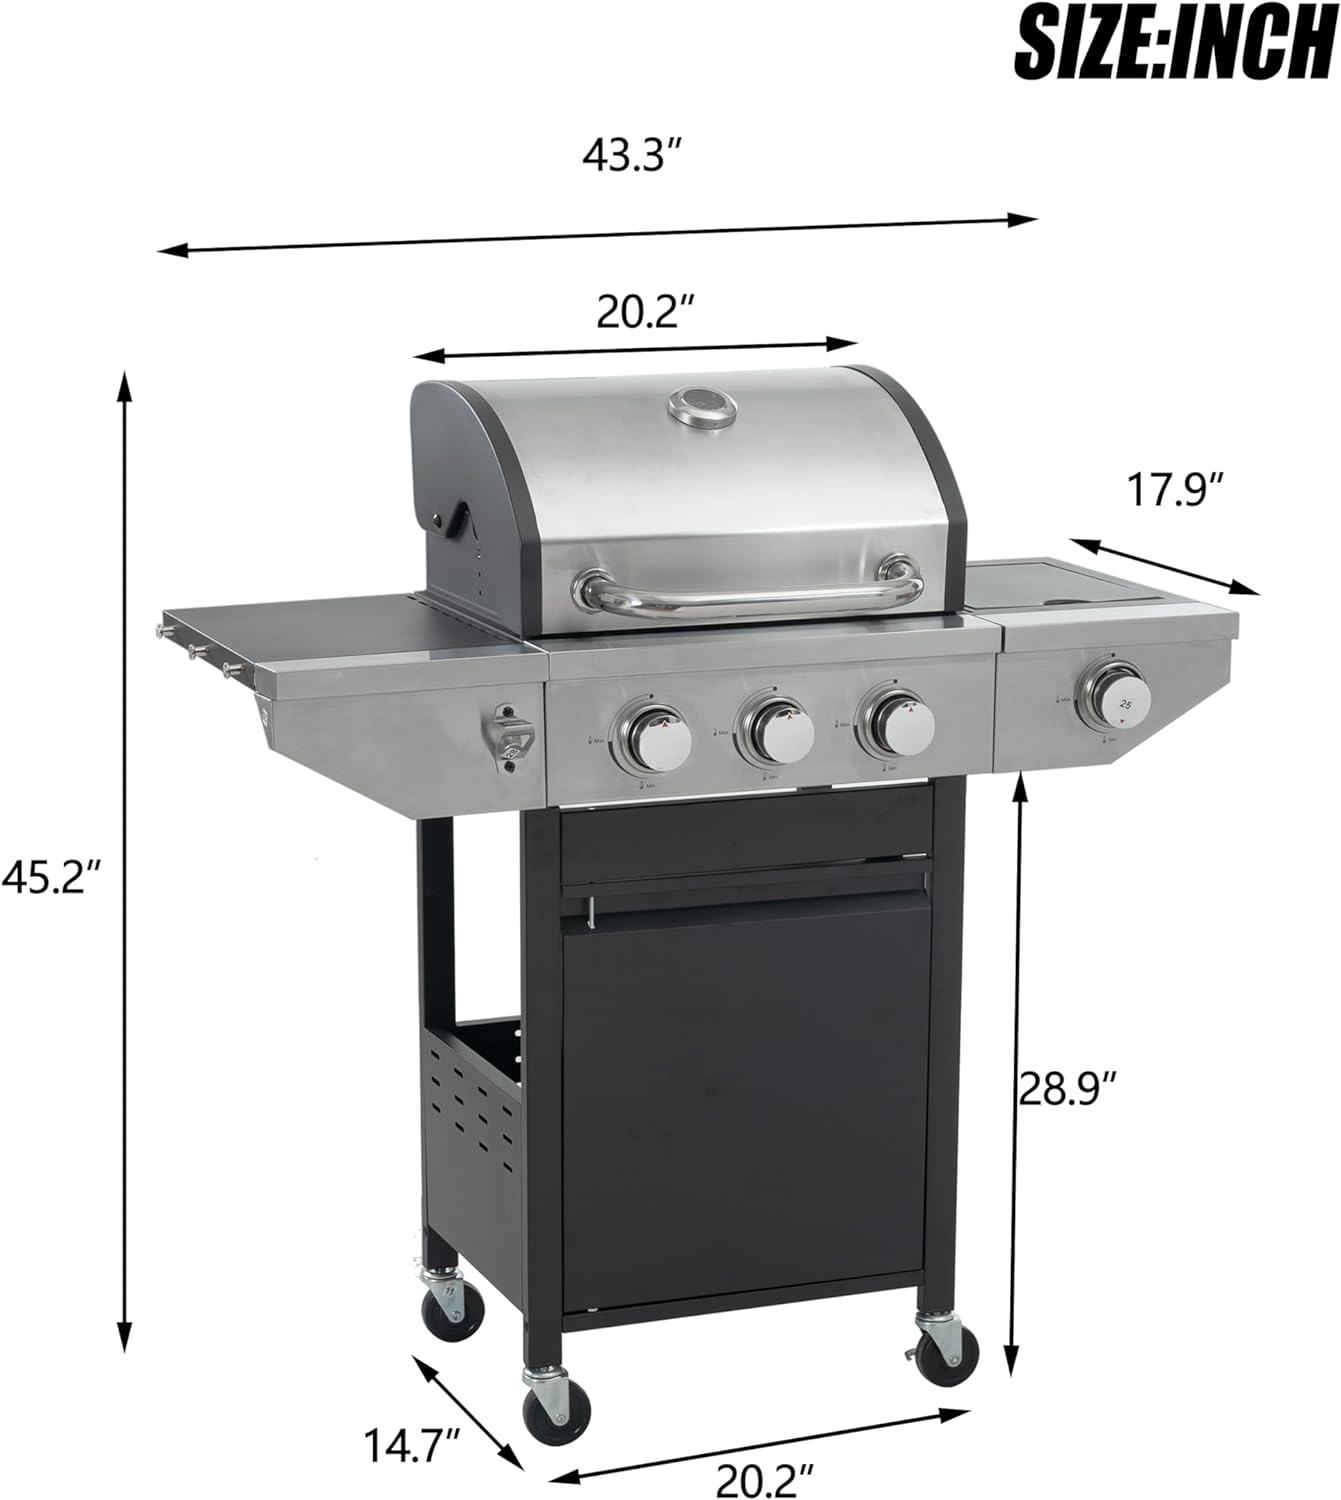 3-Burners Propane Gas Grill with Side Burner  Thermometer, 33950 BTU Output Stainless Steel Grill for Outdoor BBQ and Camping, Patio Backyard Barbecue(3 Burner+Side Burner)